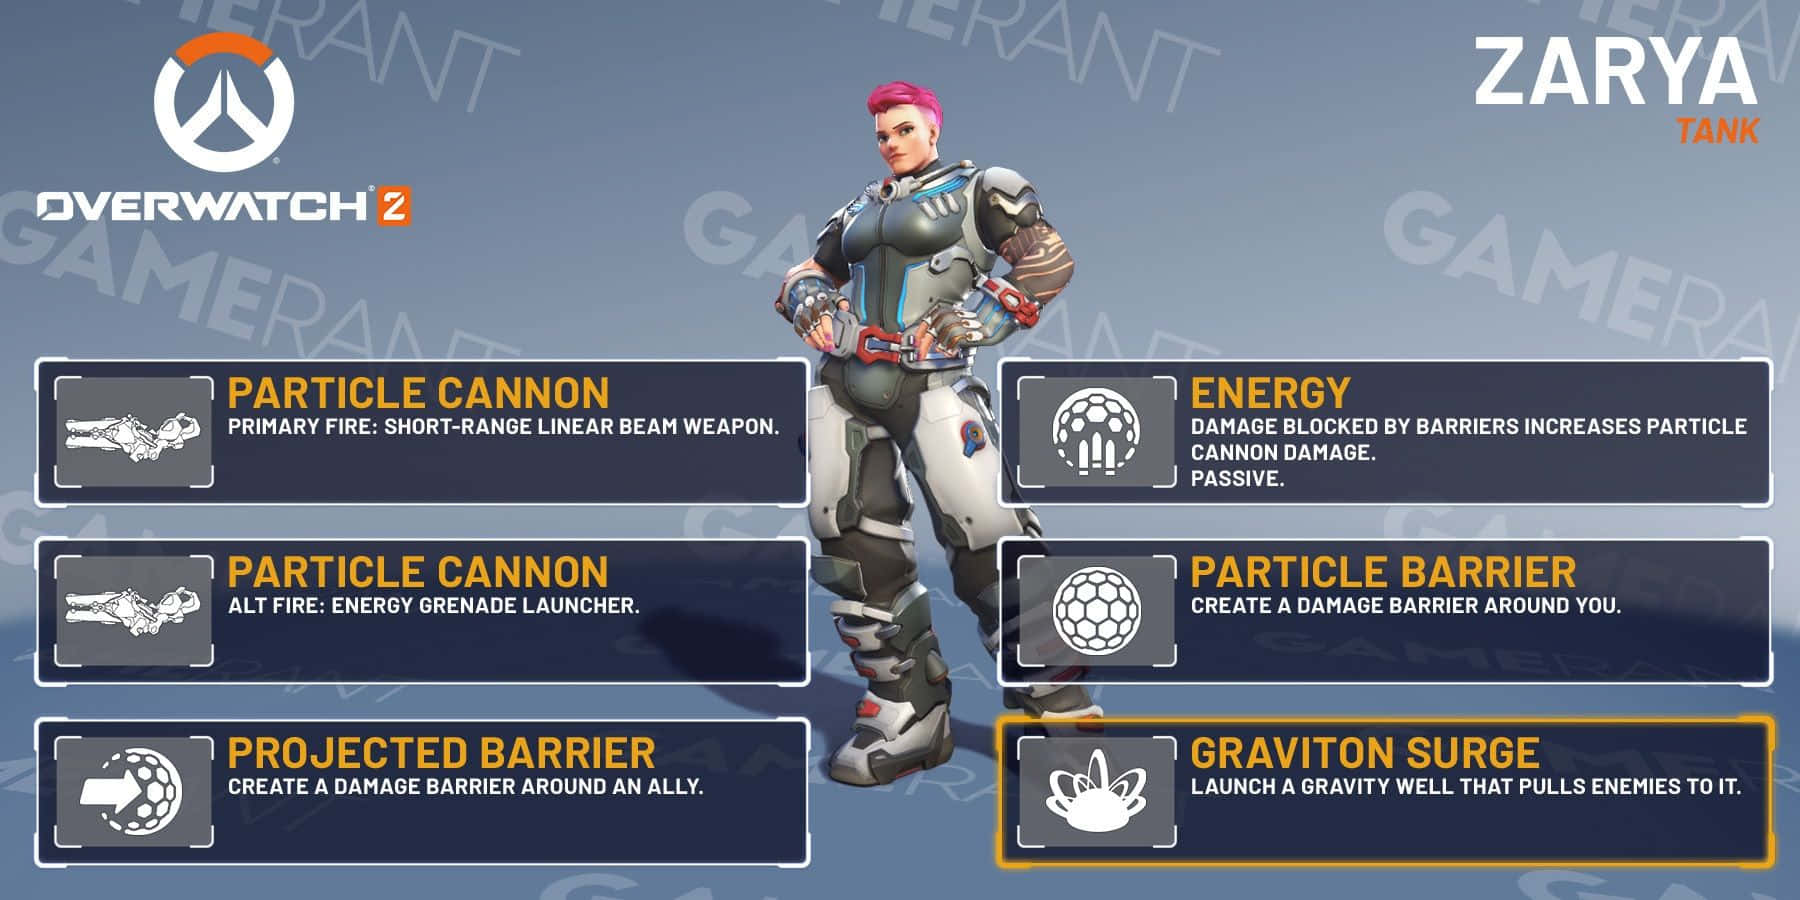 Overwatch hero Zarya showing off her Particle Cannon Wallpaper